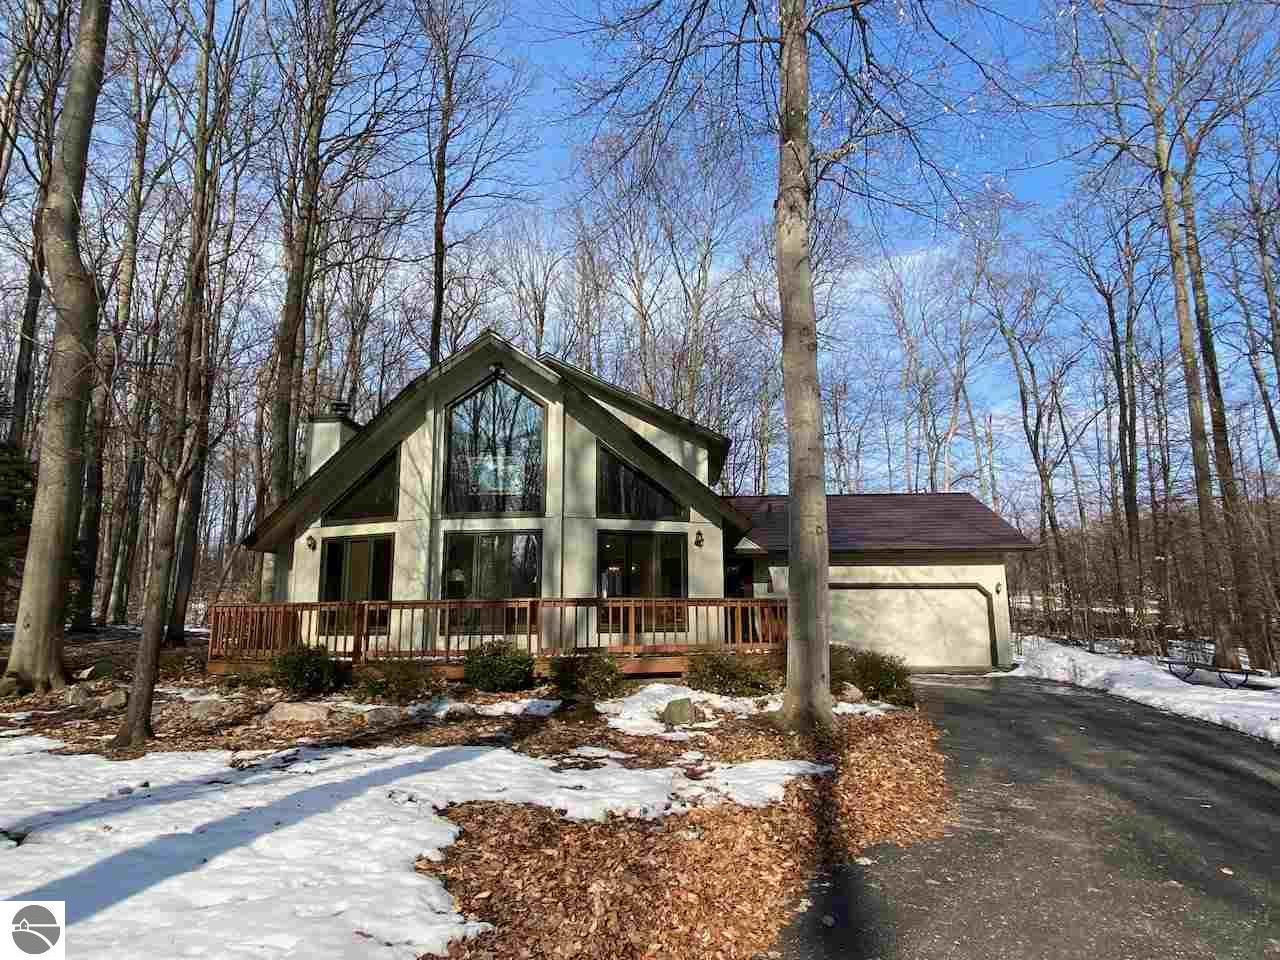 6209 Beech Knoll Drive, Bellaire, MI 49615 photo 1 of 50